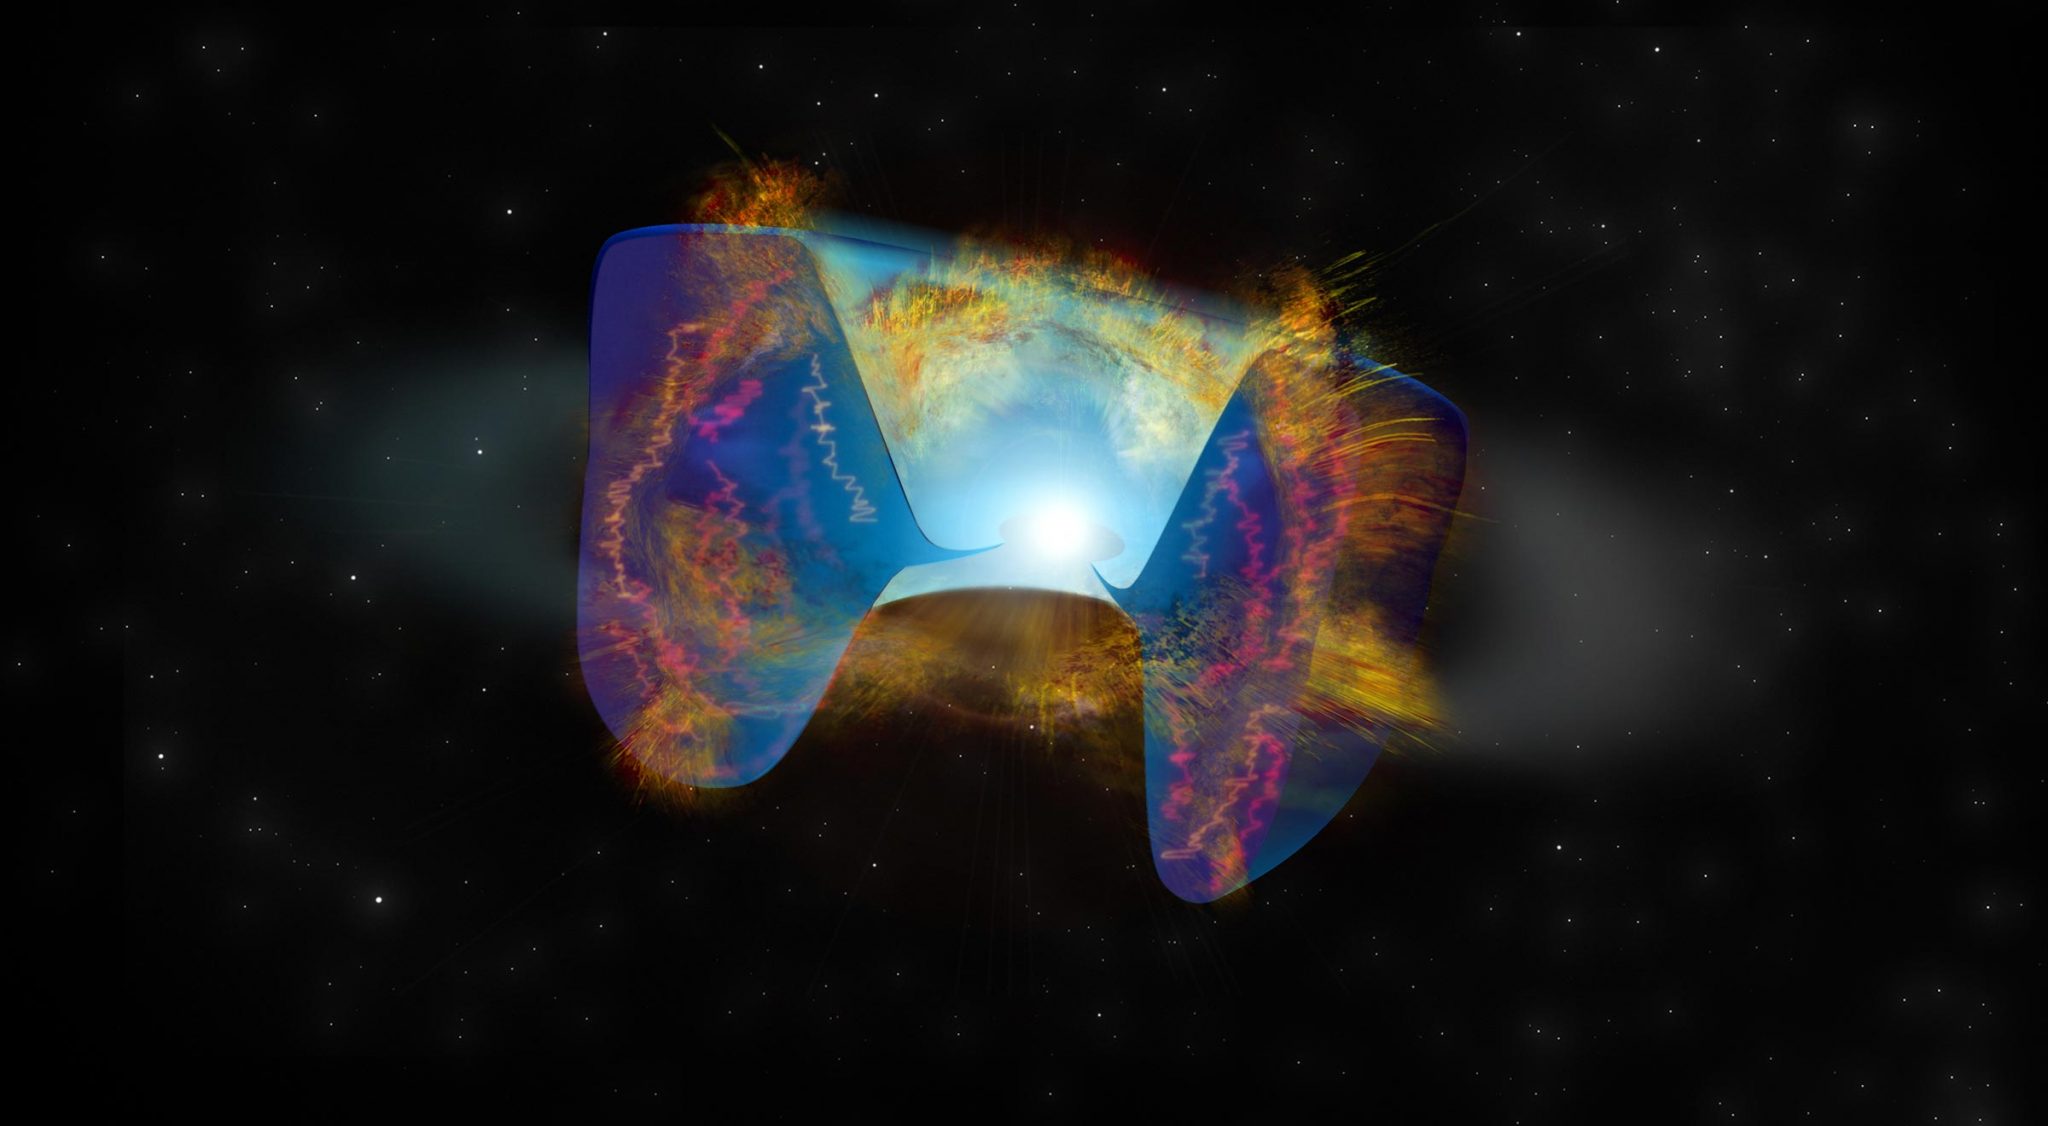 Stellar Collision Triggers Supernova Explosion “This Is the First